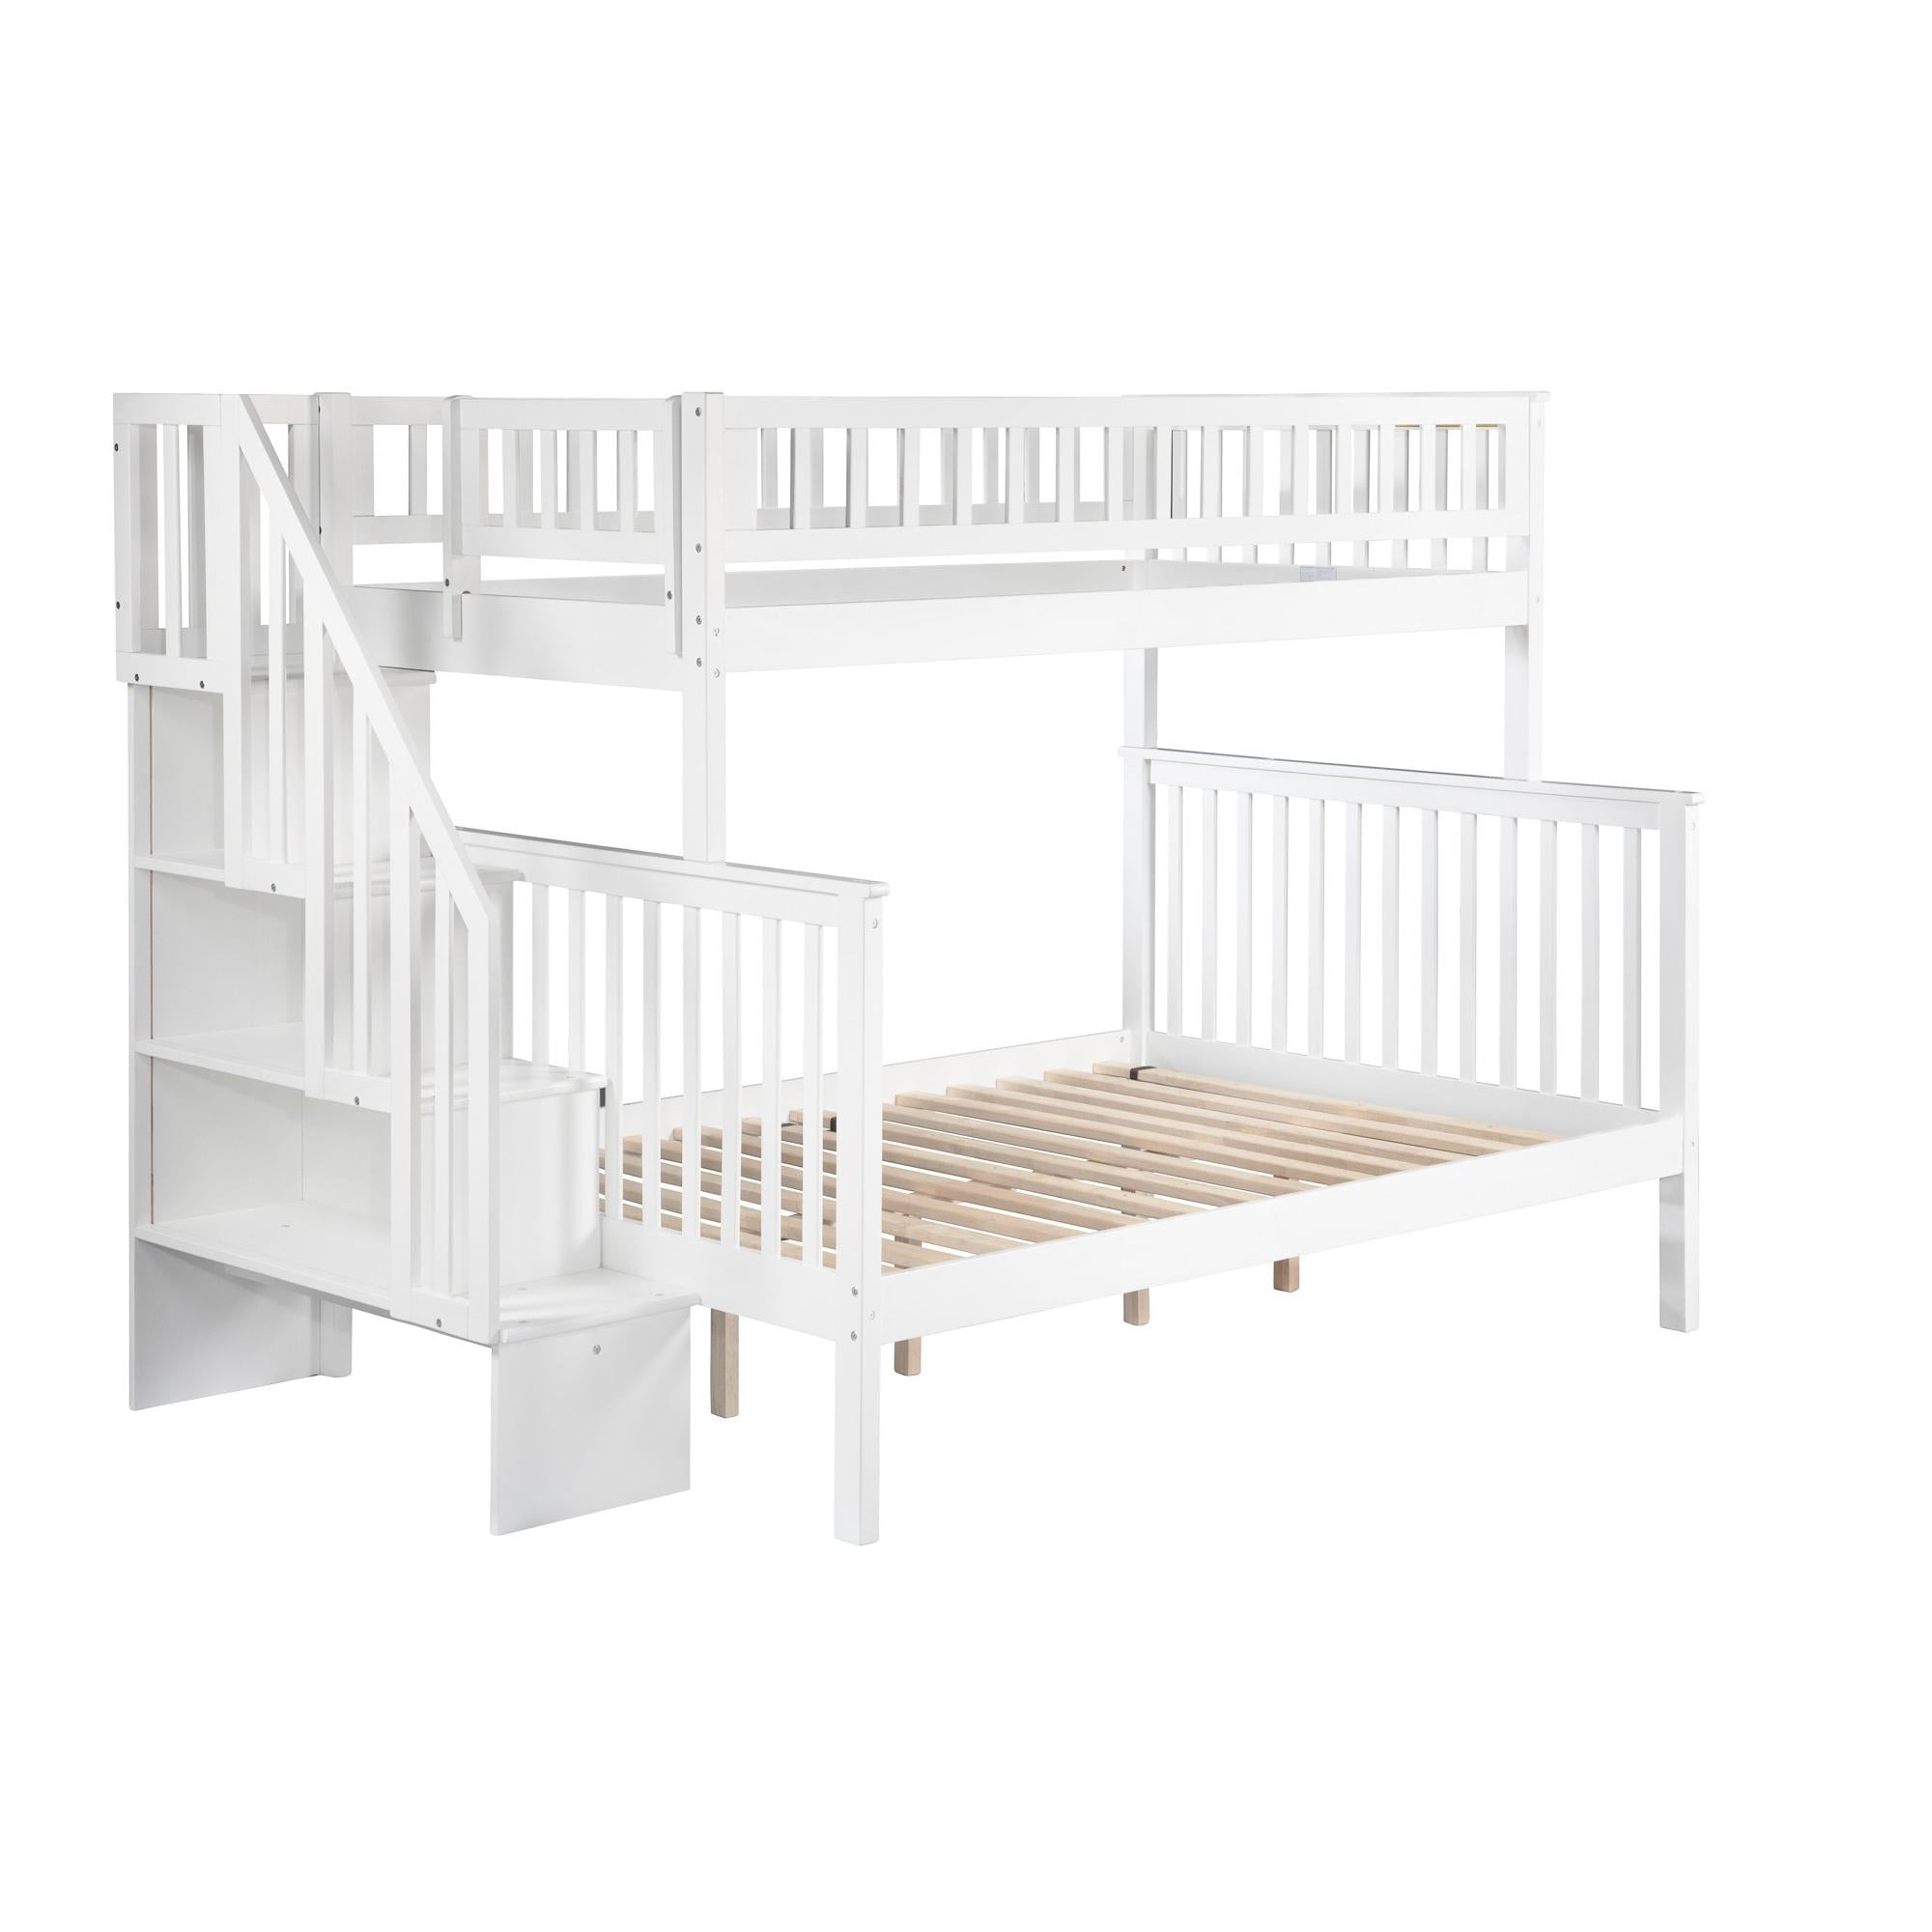 Acme Furniture Allentown Twin Over, Acme Furniture Allentown Twin Over Twin Wood Bunk Bed White